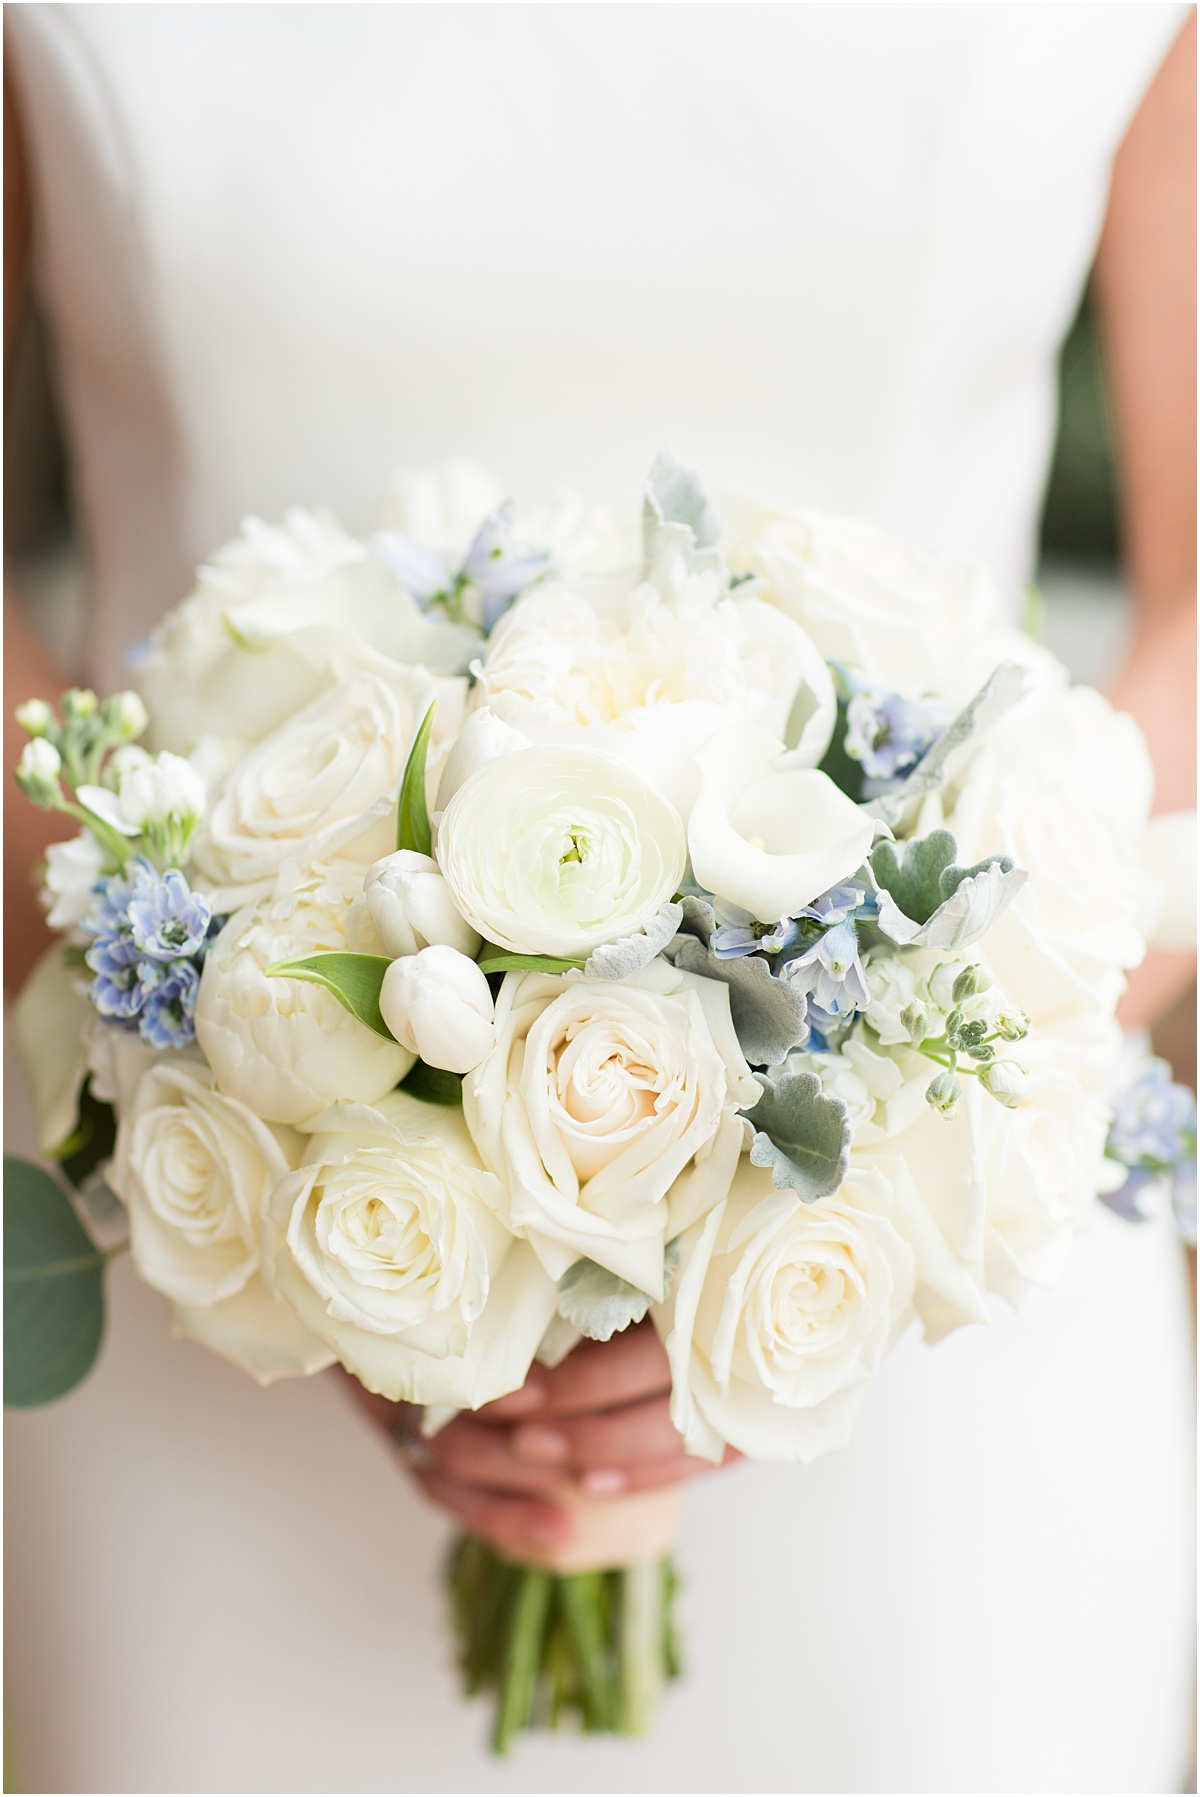 Bride holding a white bridal bouquet with roses, ranunculus and blue flowers.